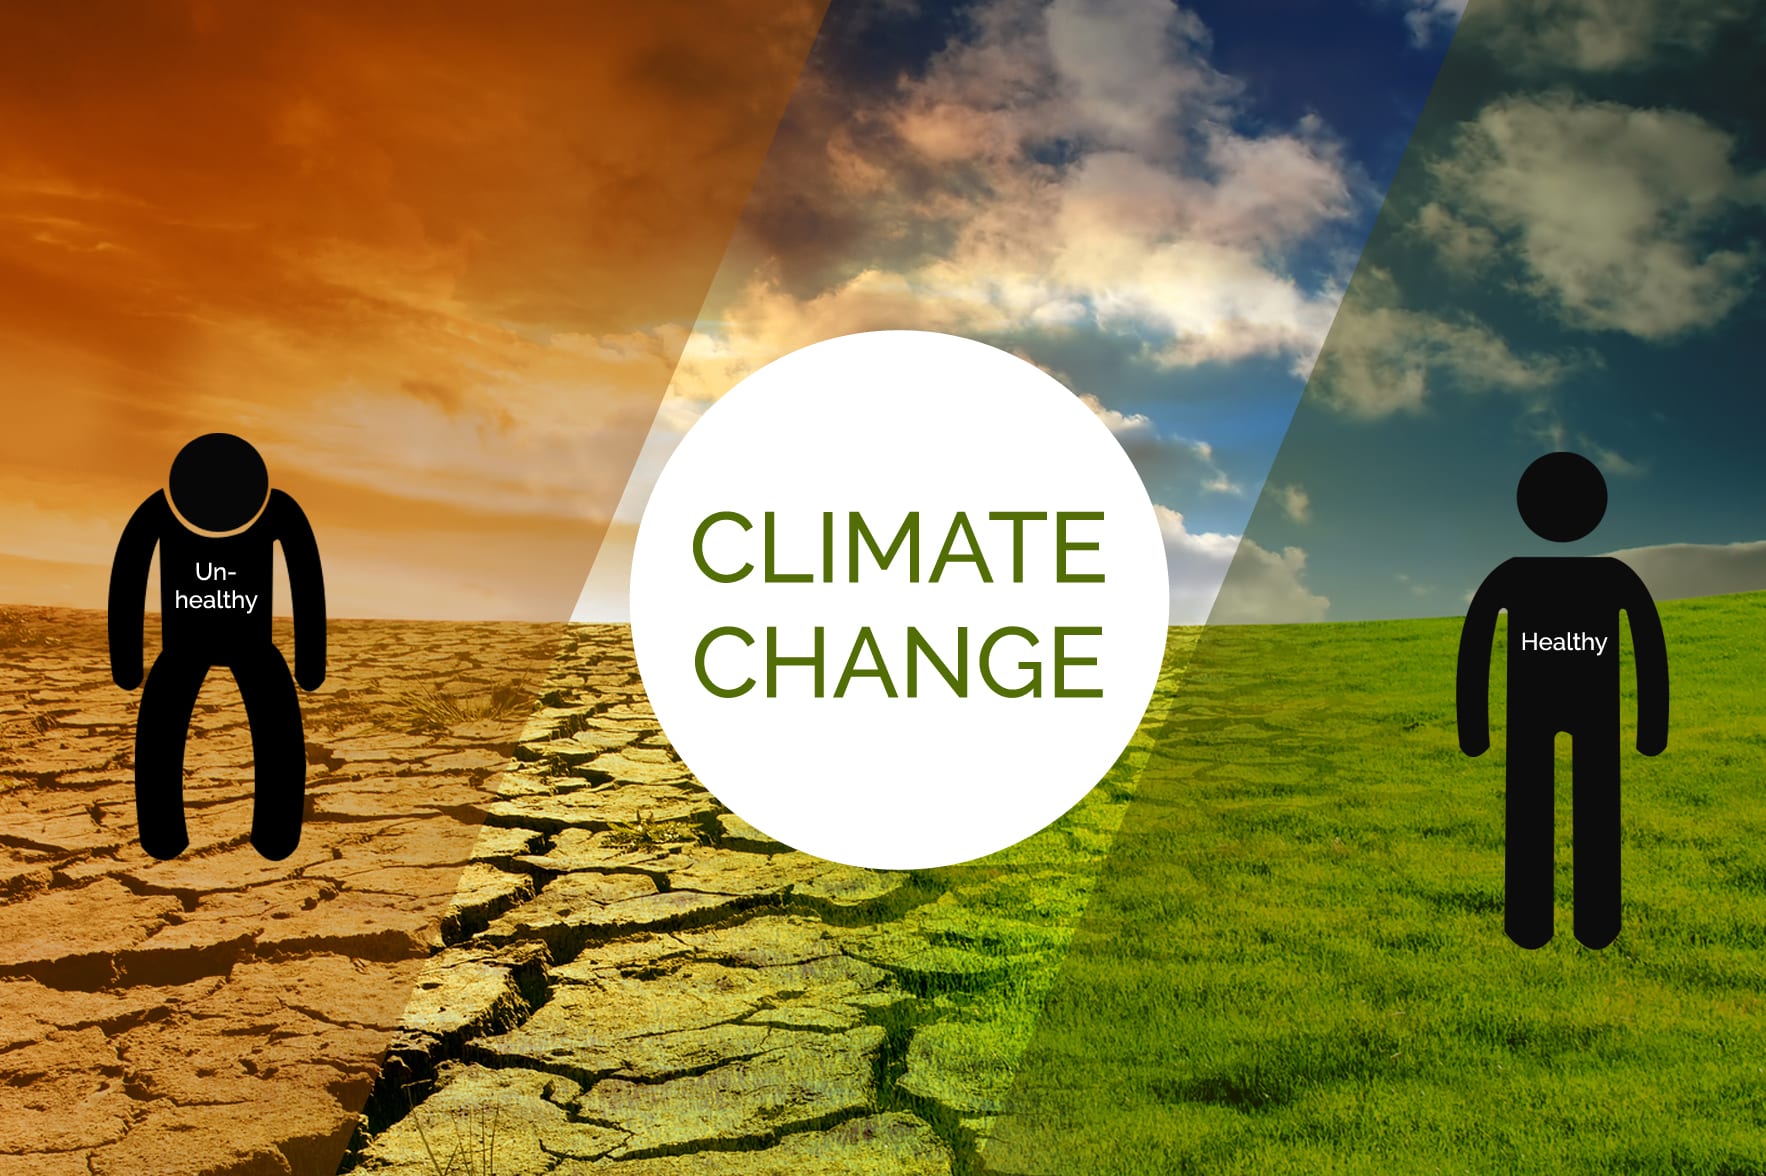 8 Unmistakable Ways Climate Change Threatens Human Health